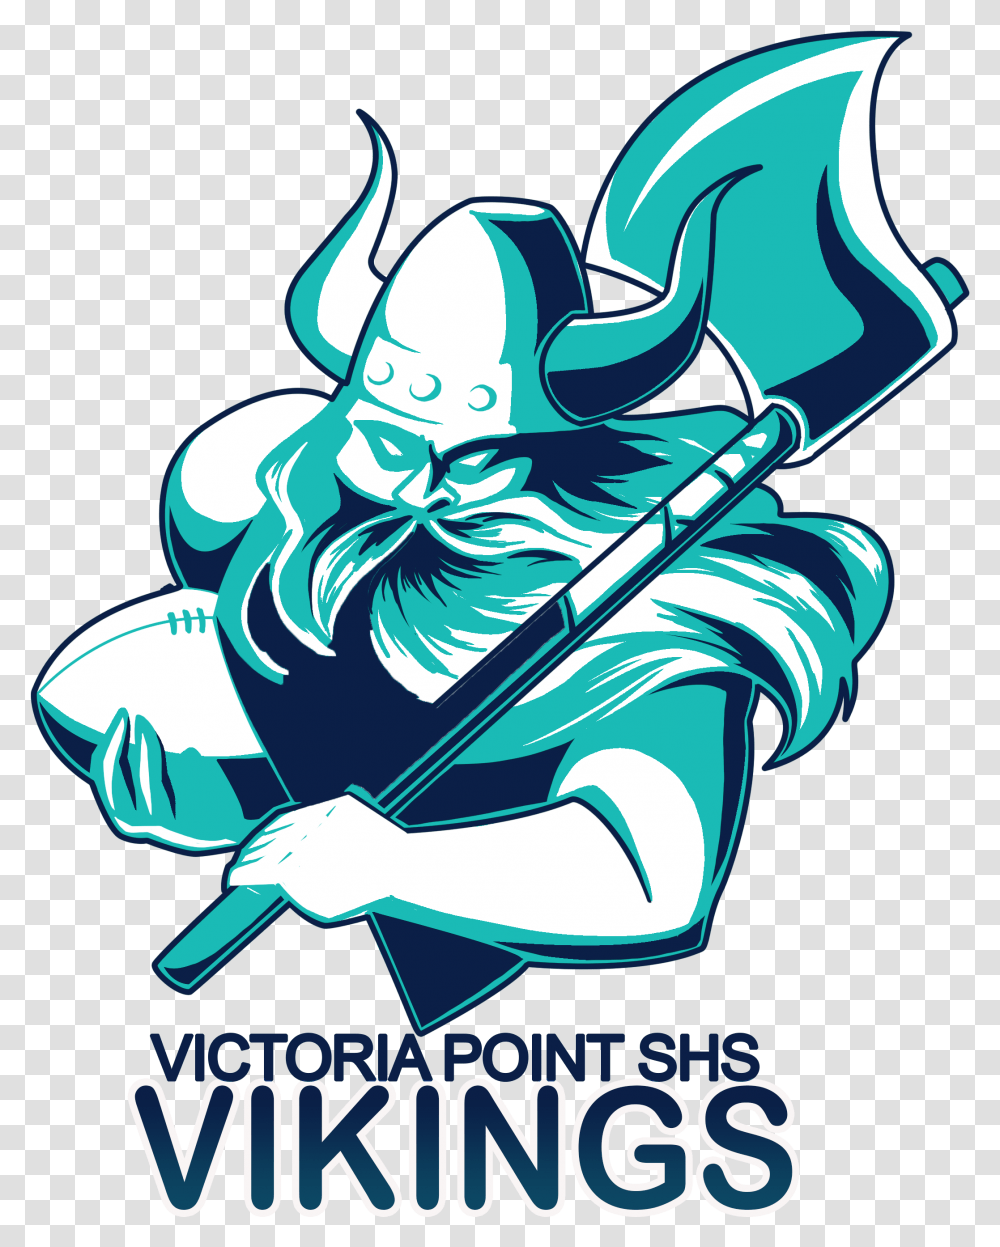 Victoria Point State High School Vikings, Emblem, Leisure Activities, Poster Transparent Png